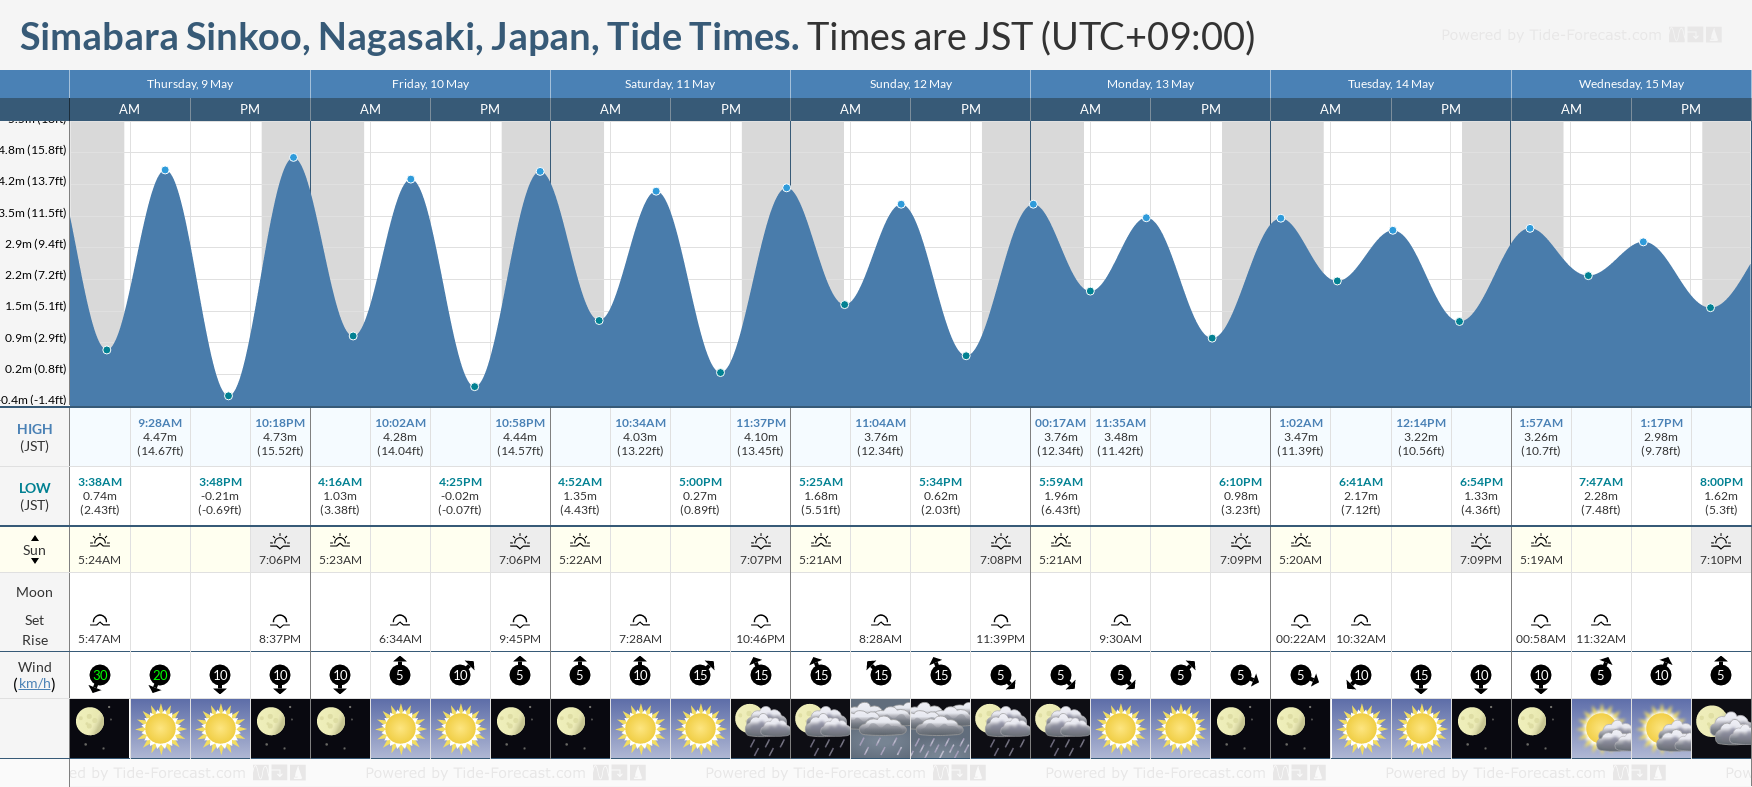 Simabara Sinkoo, Nagasaki, Japan Tide Chart including high and low tide times for the next 7 days